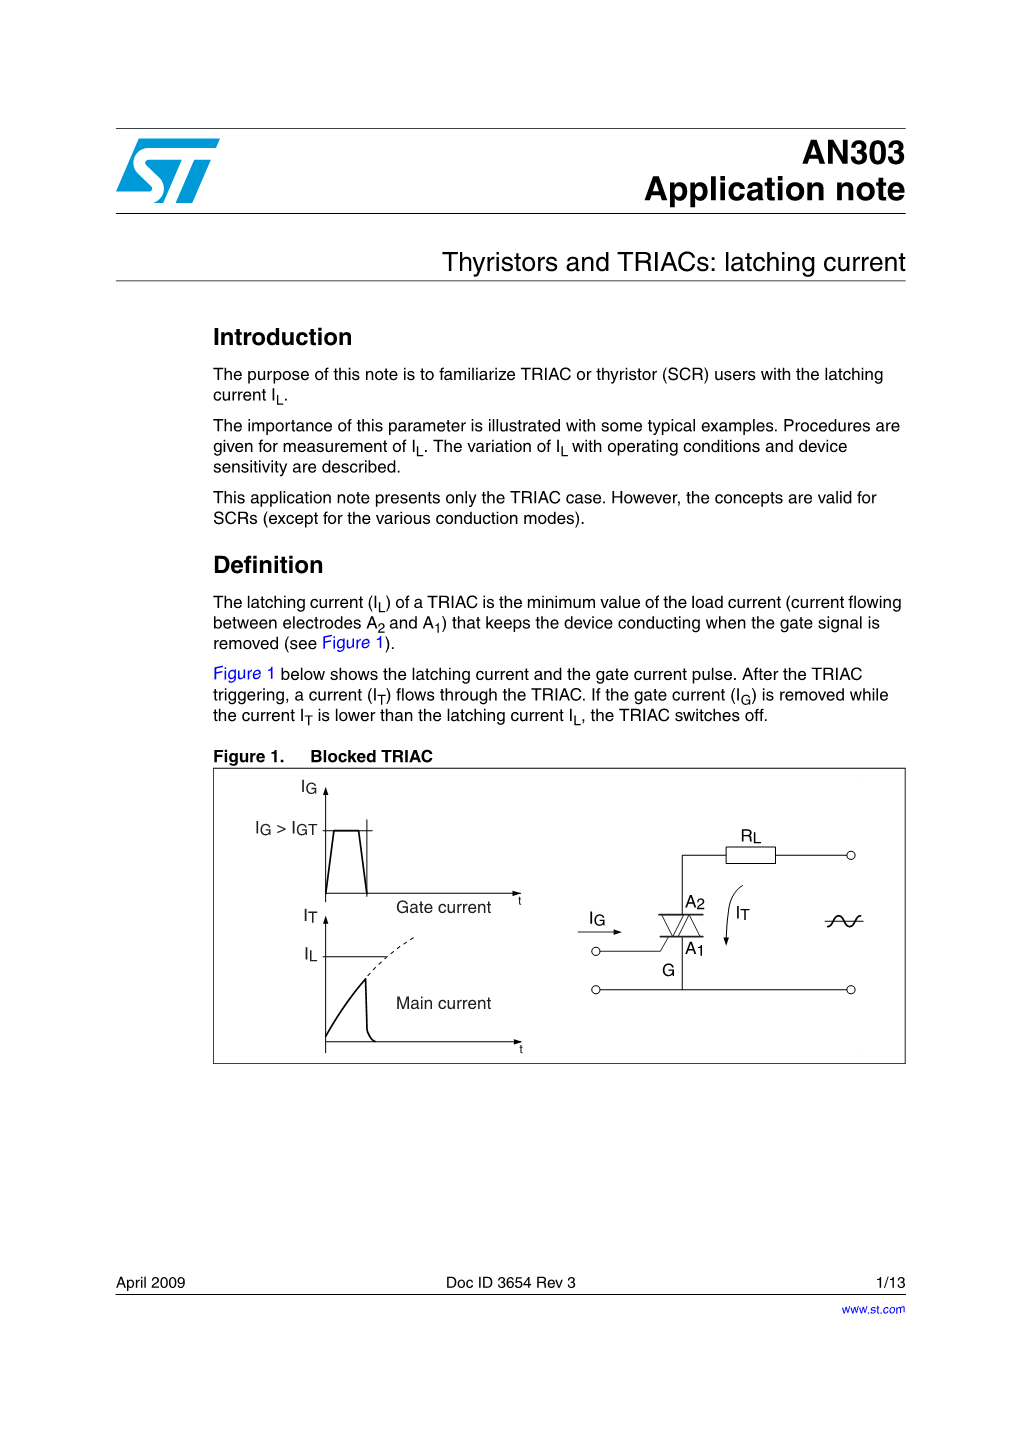 AN303 Thyristors and Triacs: Latching Current